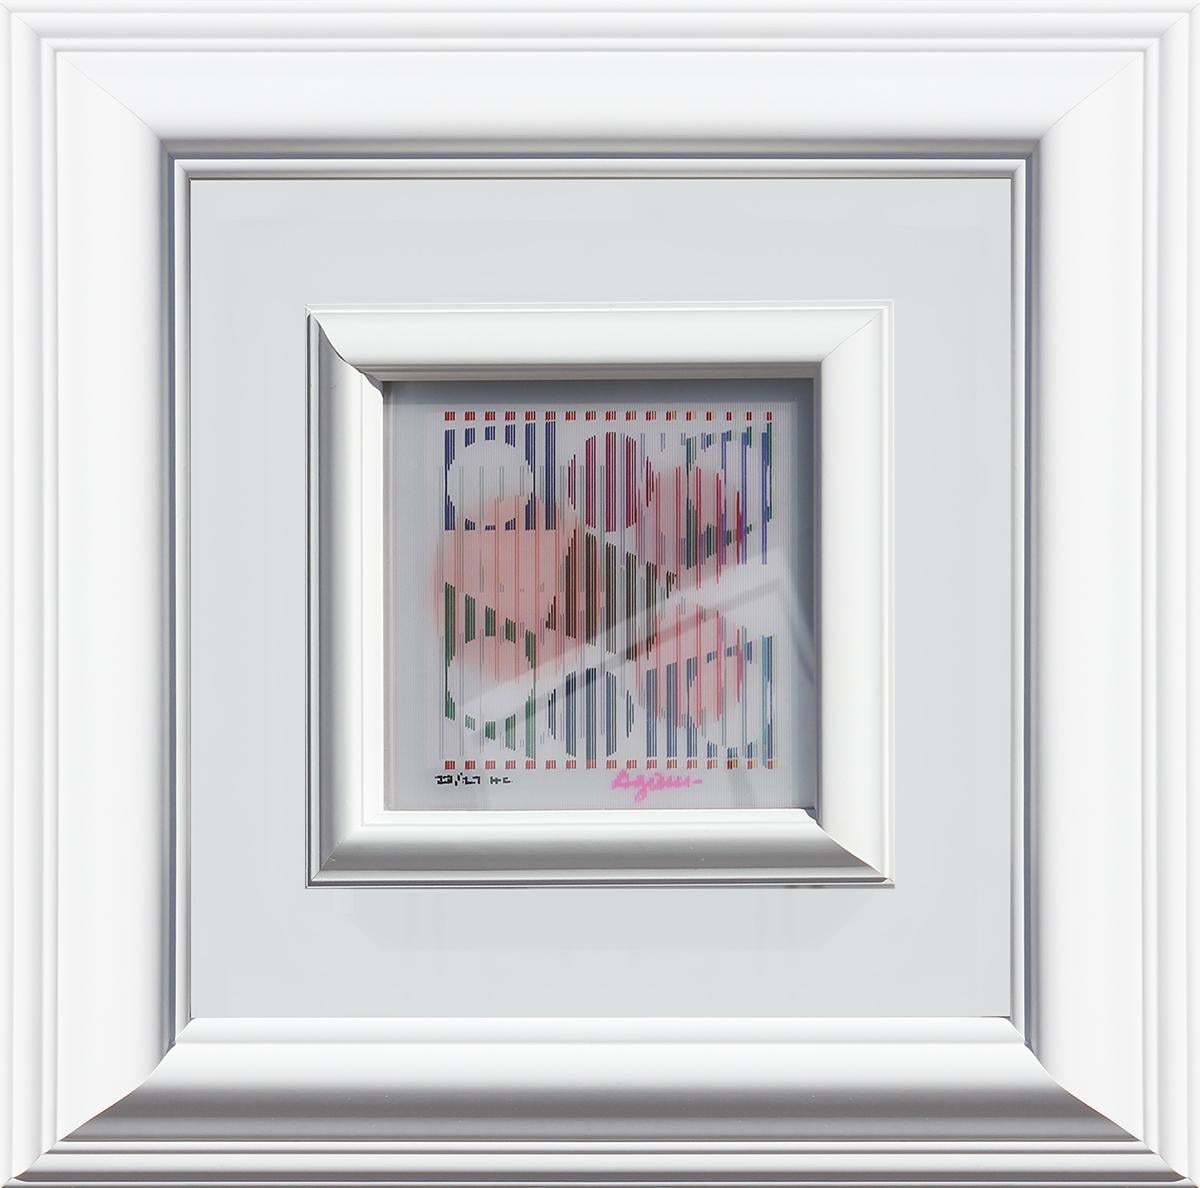 “Curb 2+4” Colorful Abstract Geometric Lenticular Agamograph Edition 22/27 - Op Art Print by Yaacov Agam